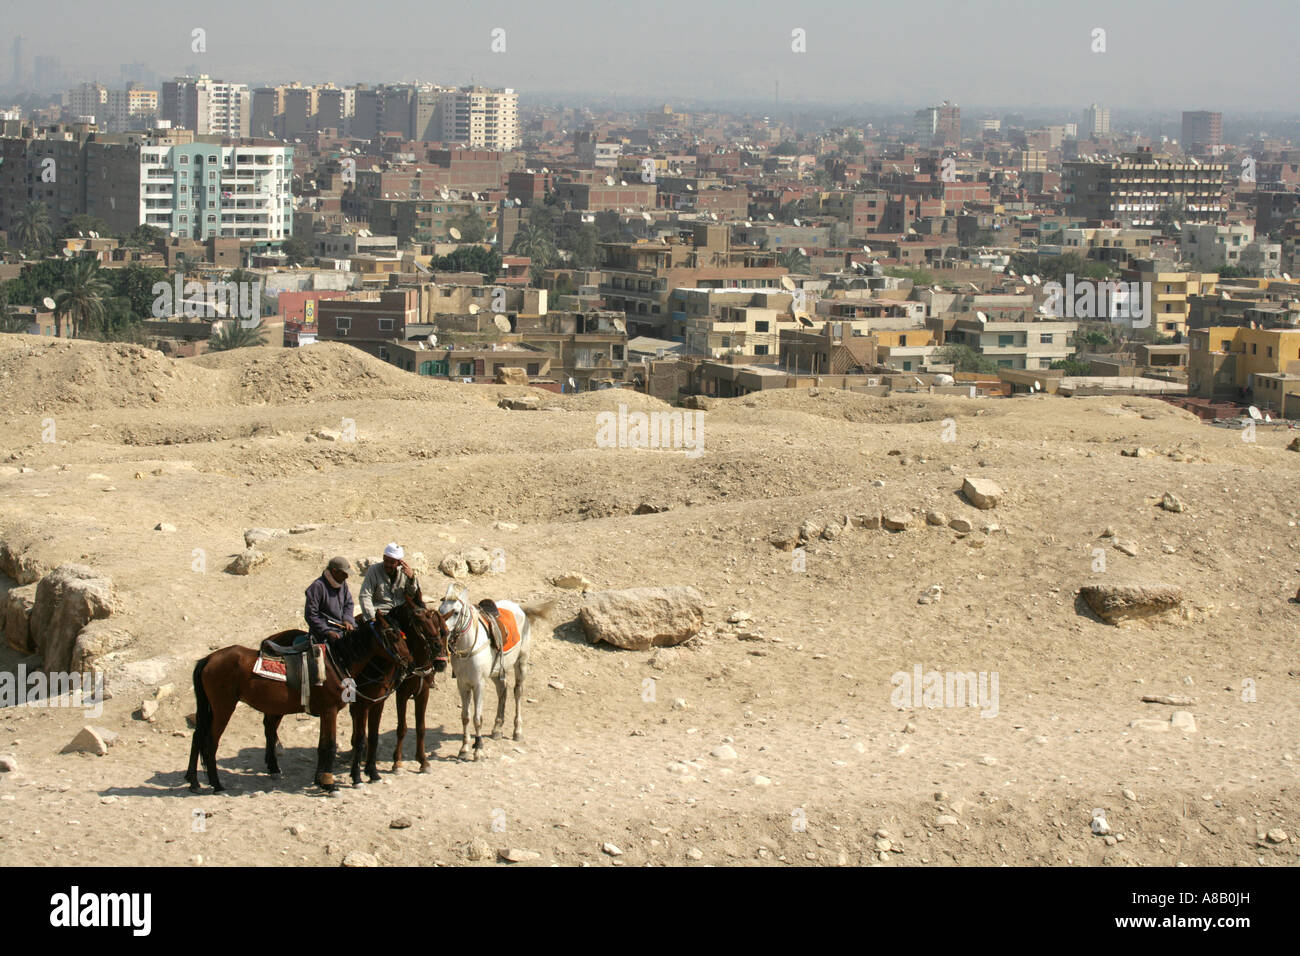 Horseman in desert landscape with distant cityscape of Cairo, Egypt, Middle East Stock Photo